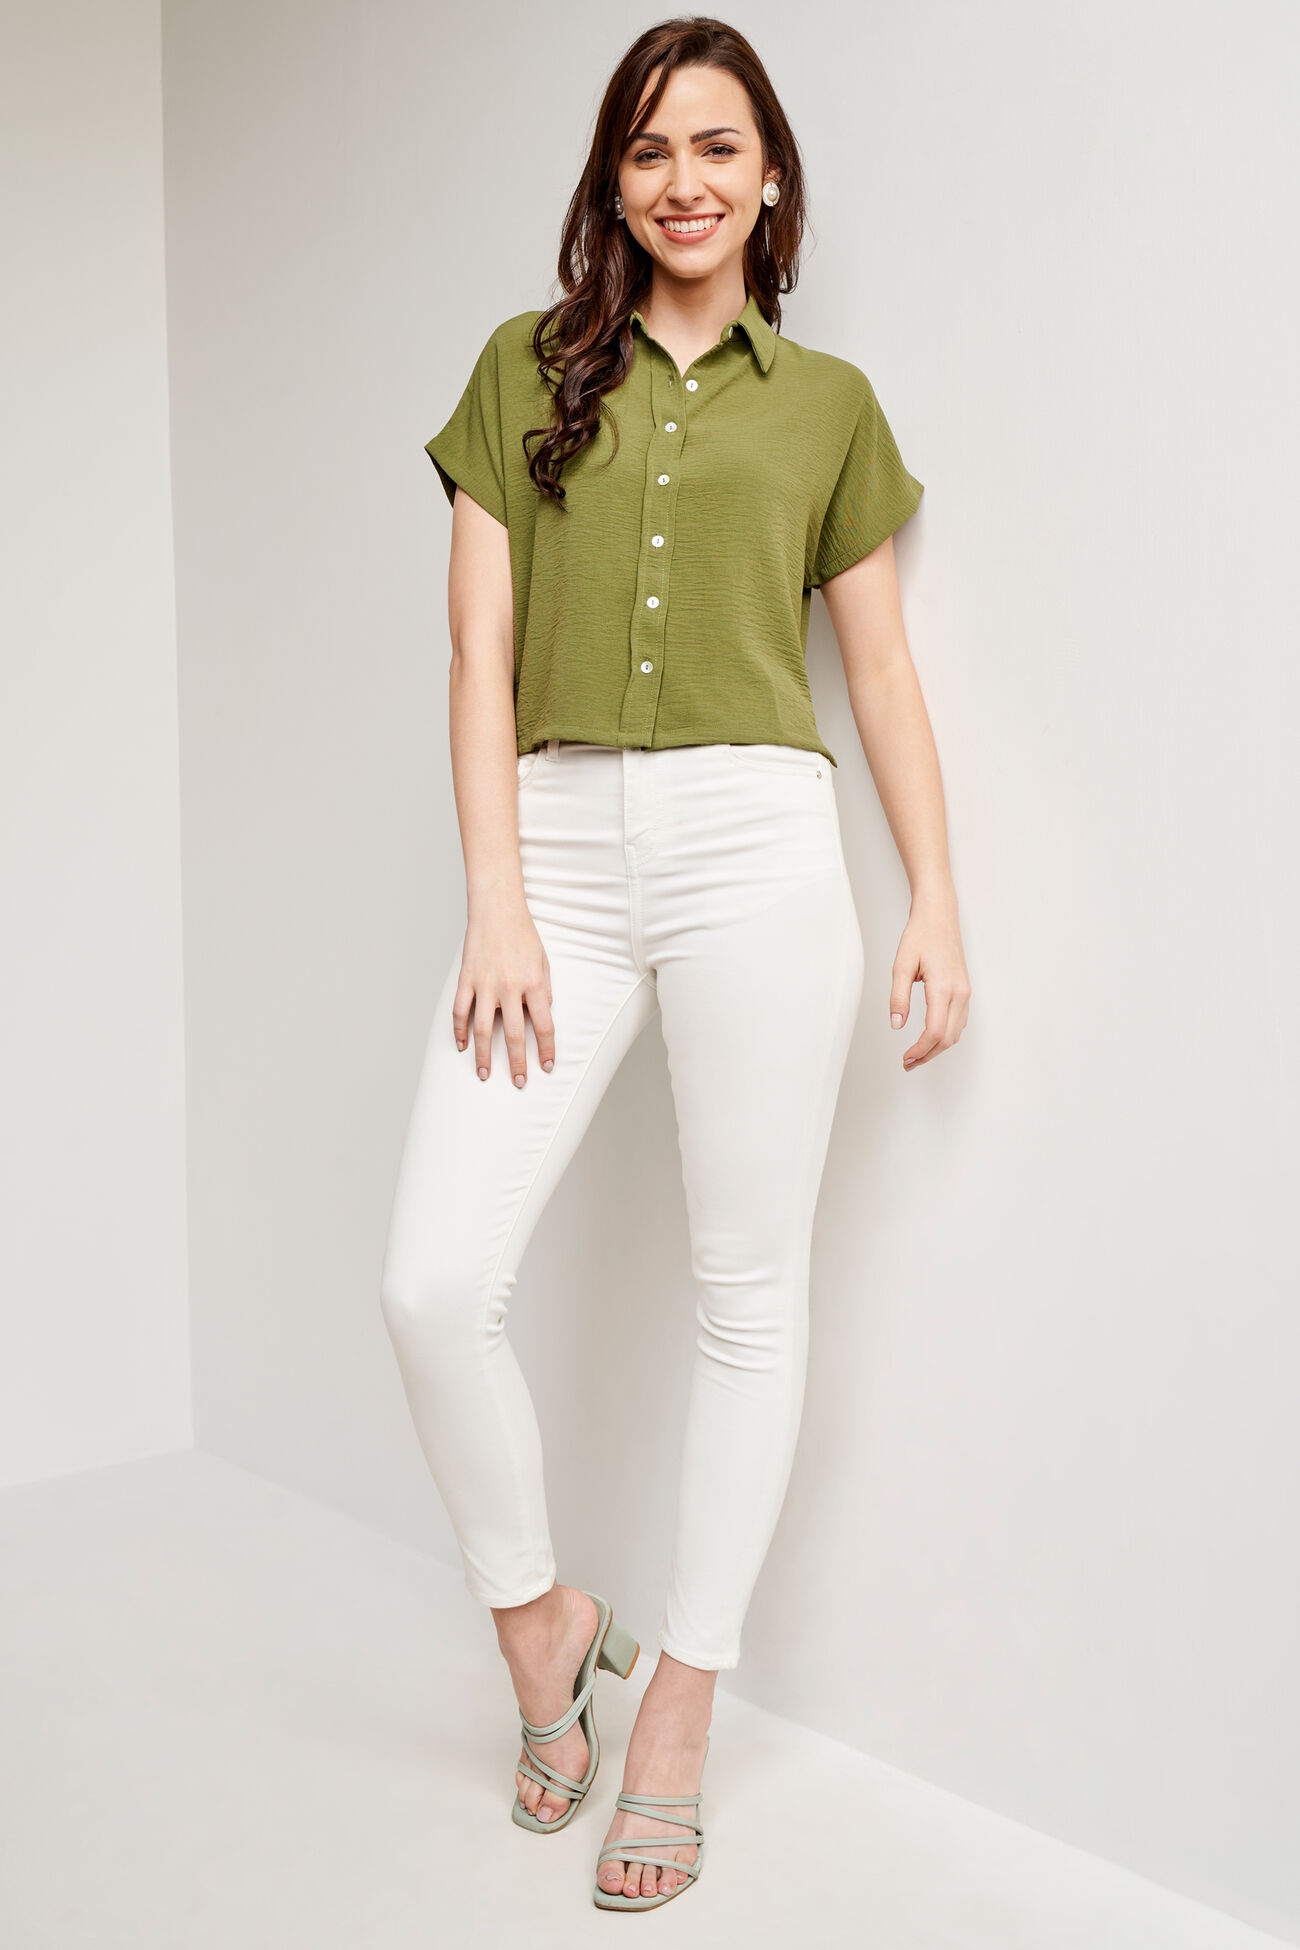 Olive Loose Fit Shirt Style Top, Olive, image 4